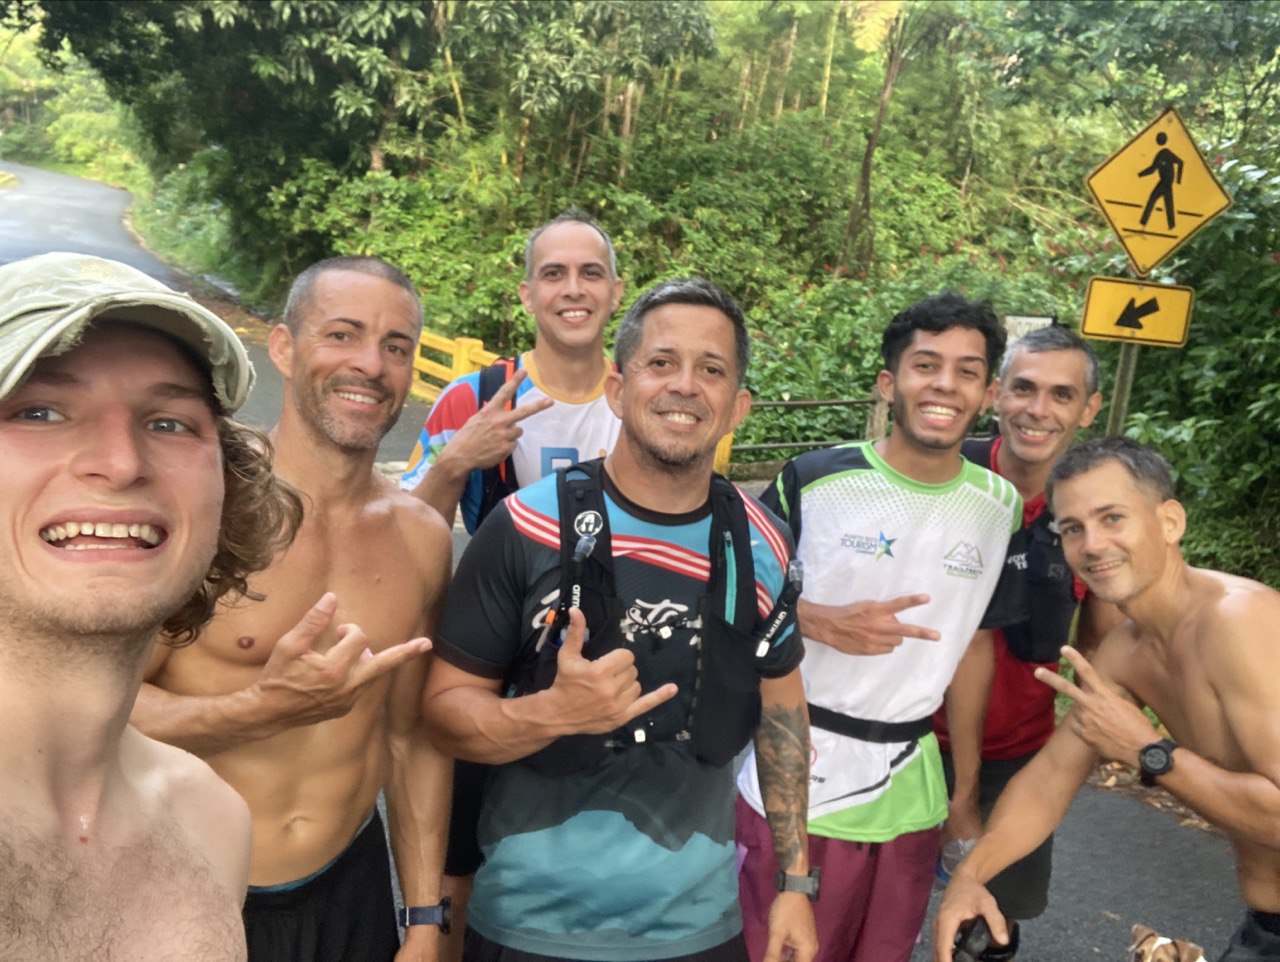 A selfie with the trailrunners I met at El Yunque!